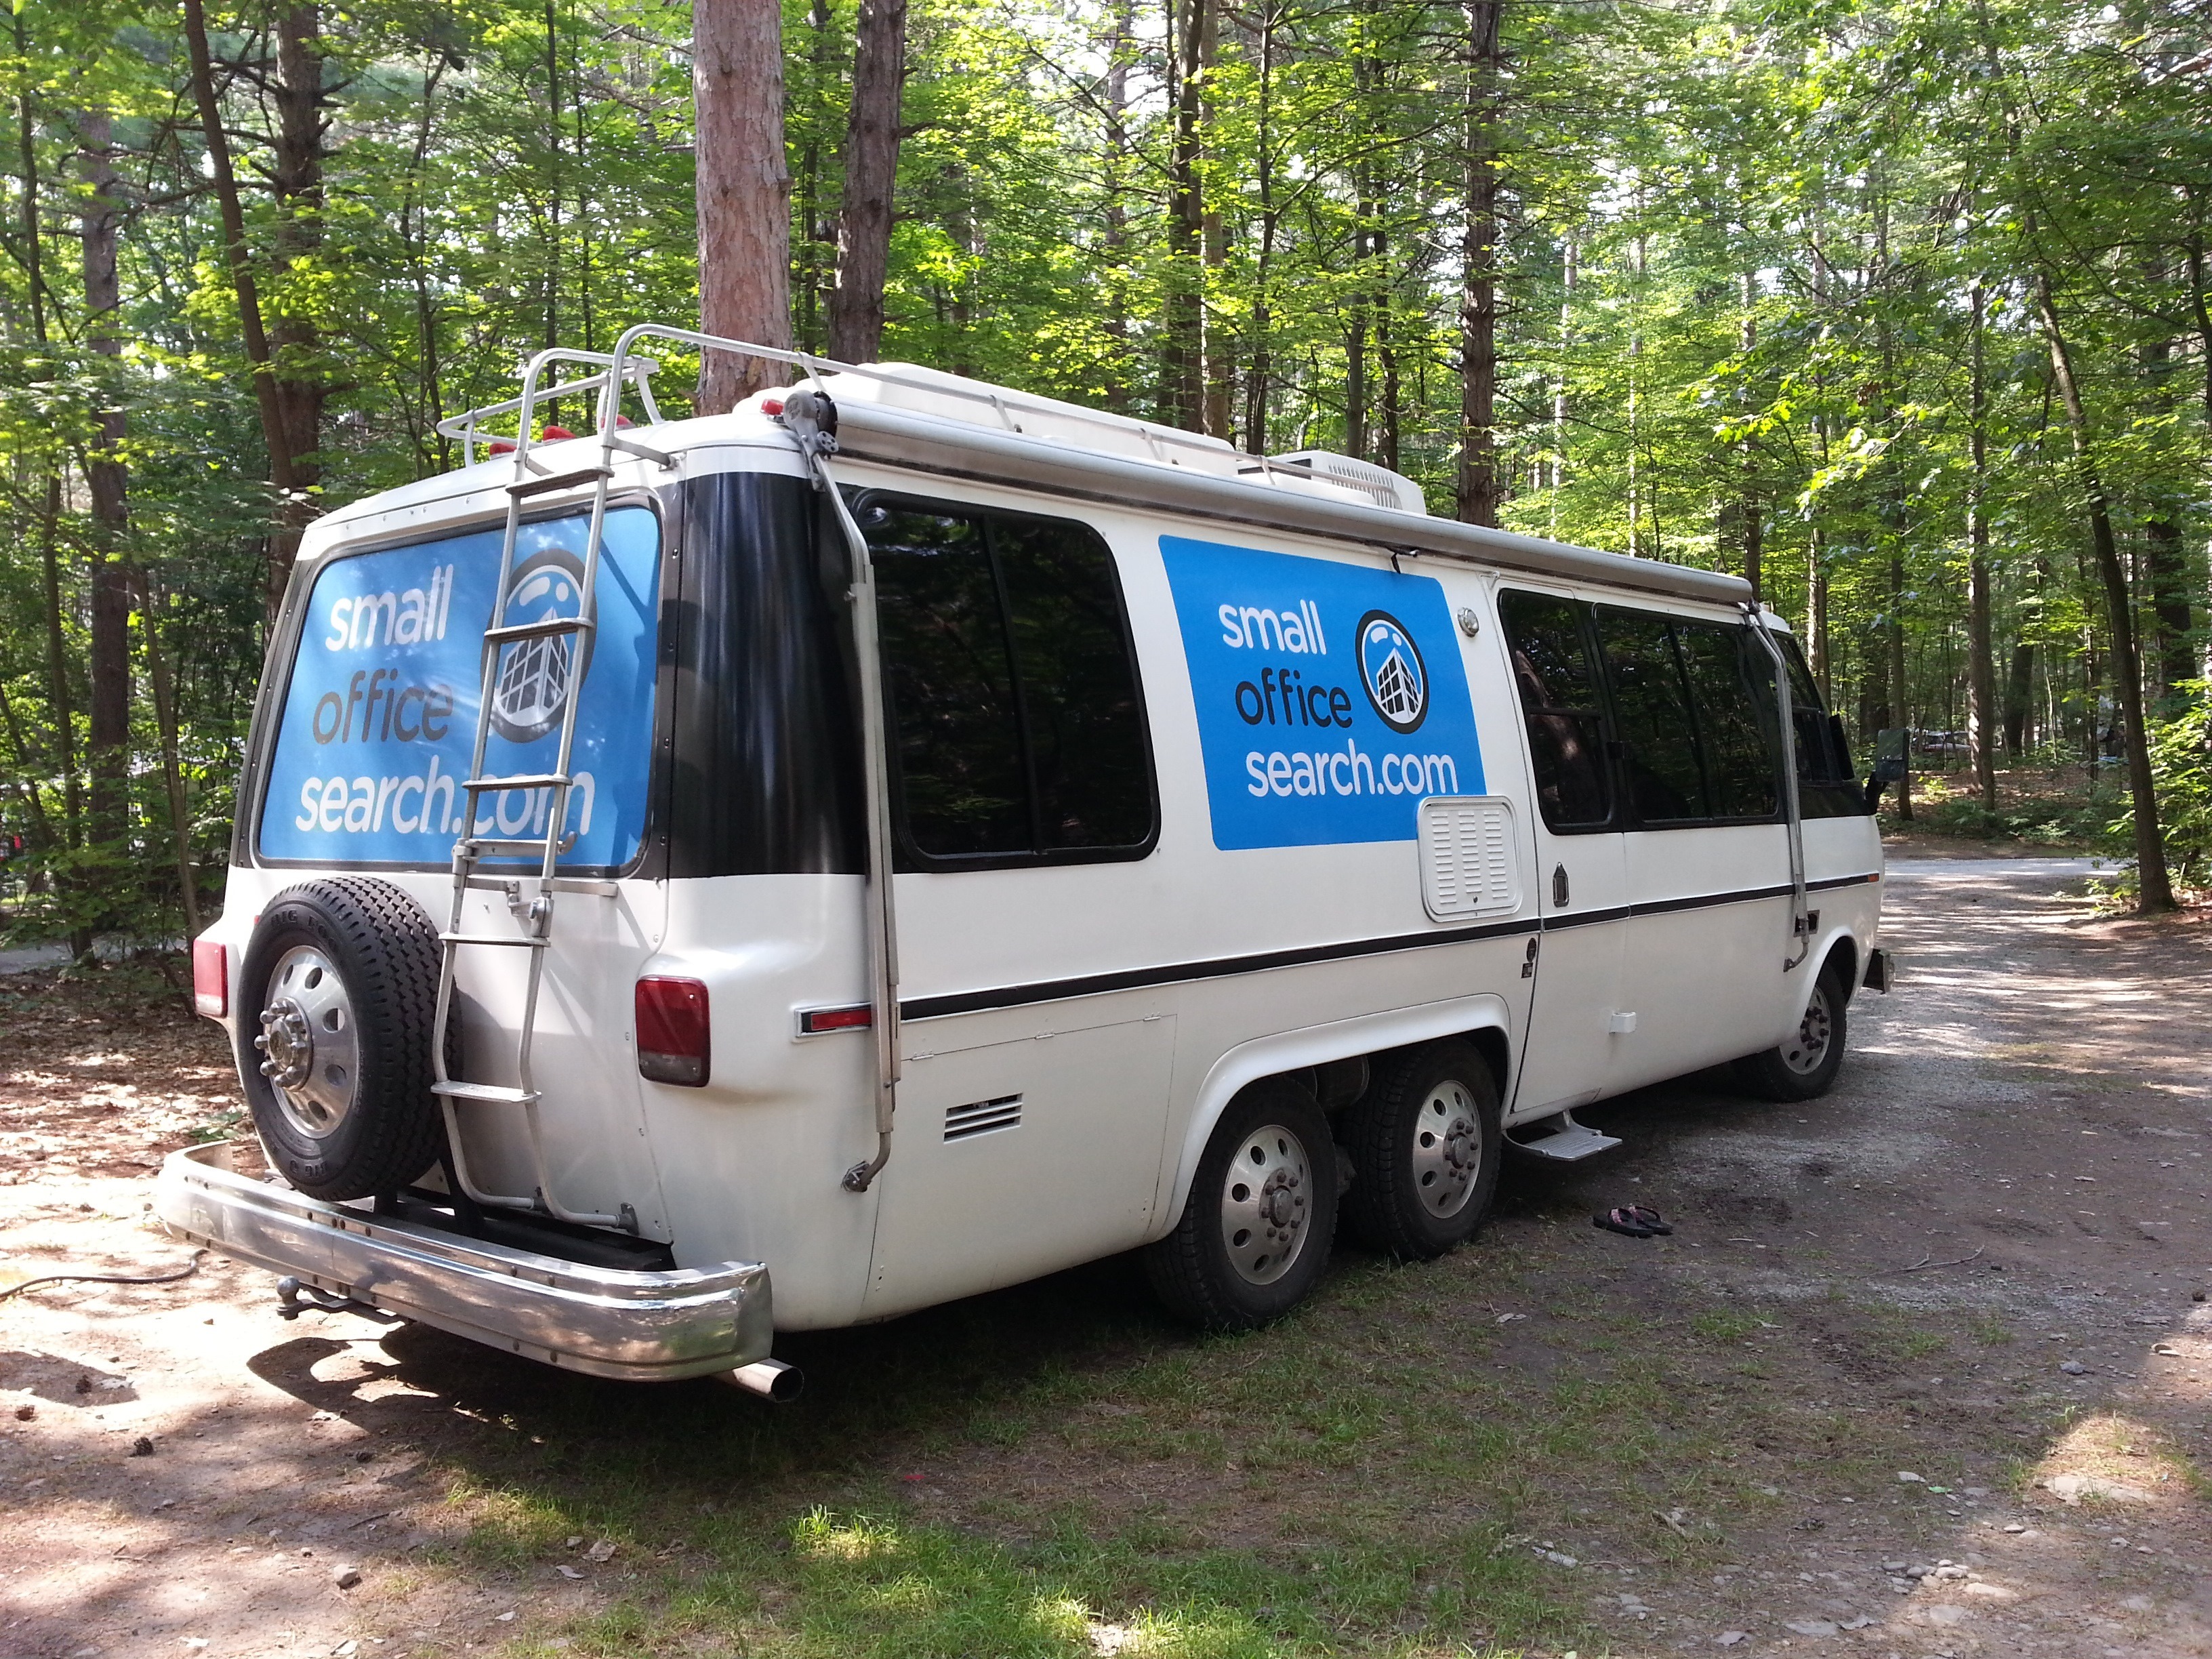 Scavone used a combination of vinyl decals and perforated rear window graphics to make the RV stand out.